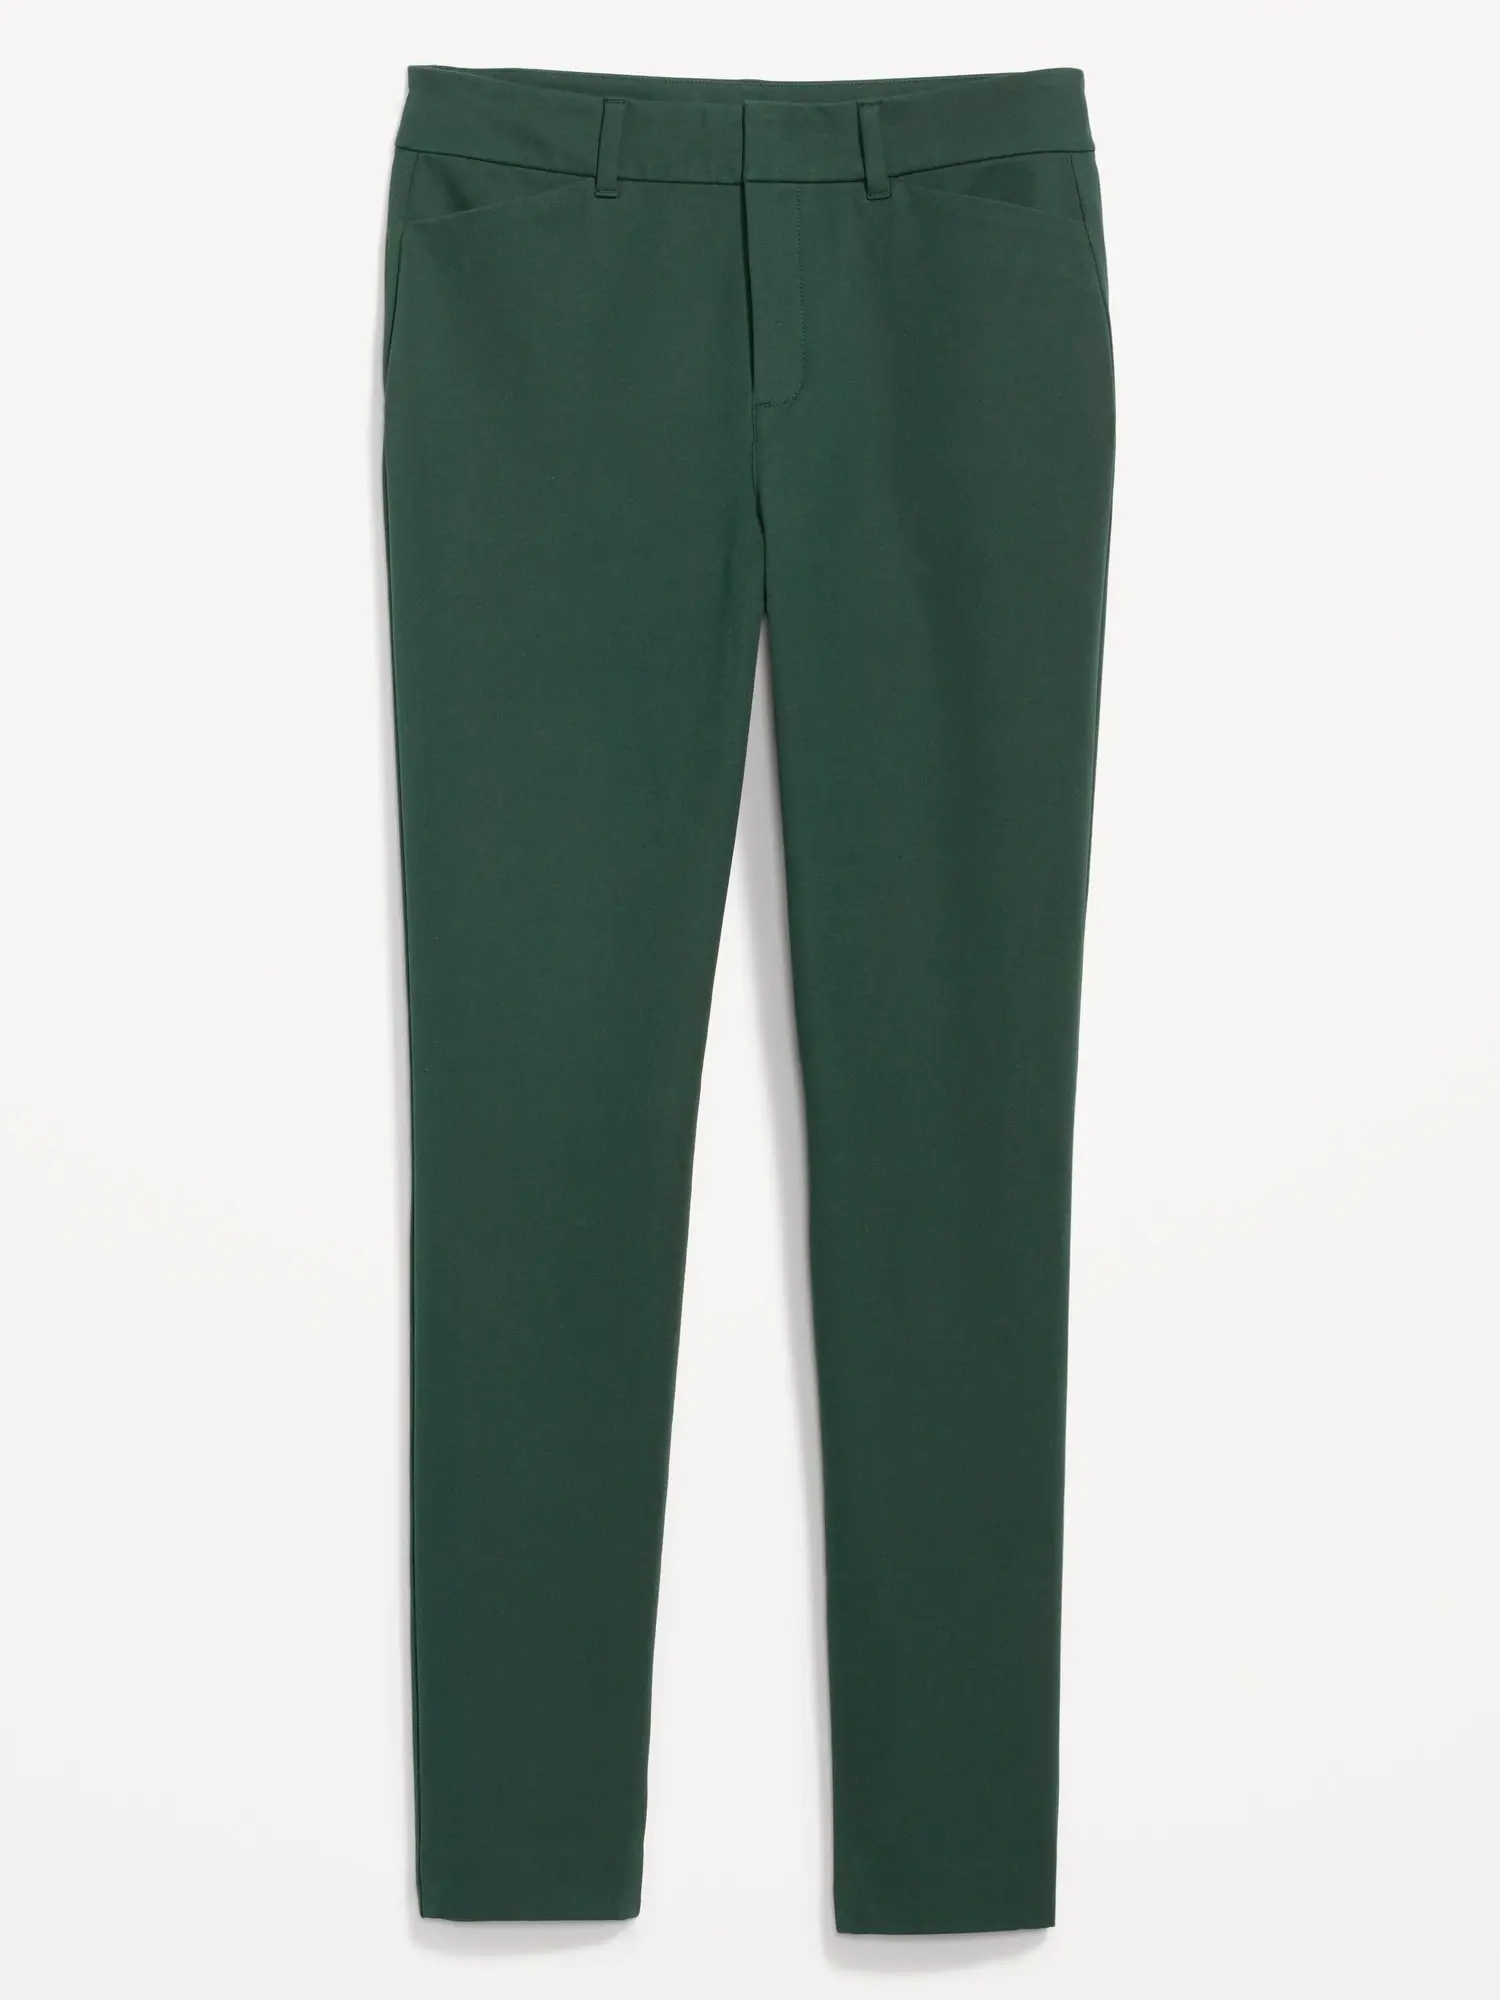 Old Navy High-Waisted Pixie Skinny Pants for Women green. 1